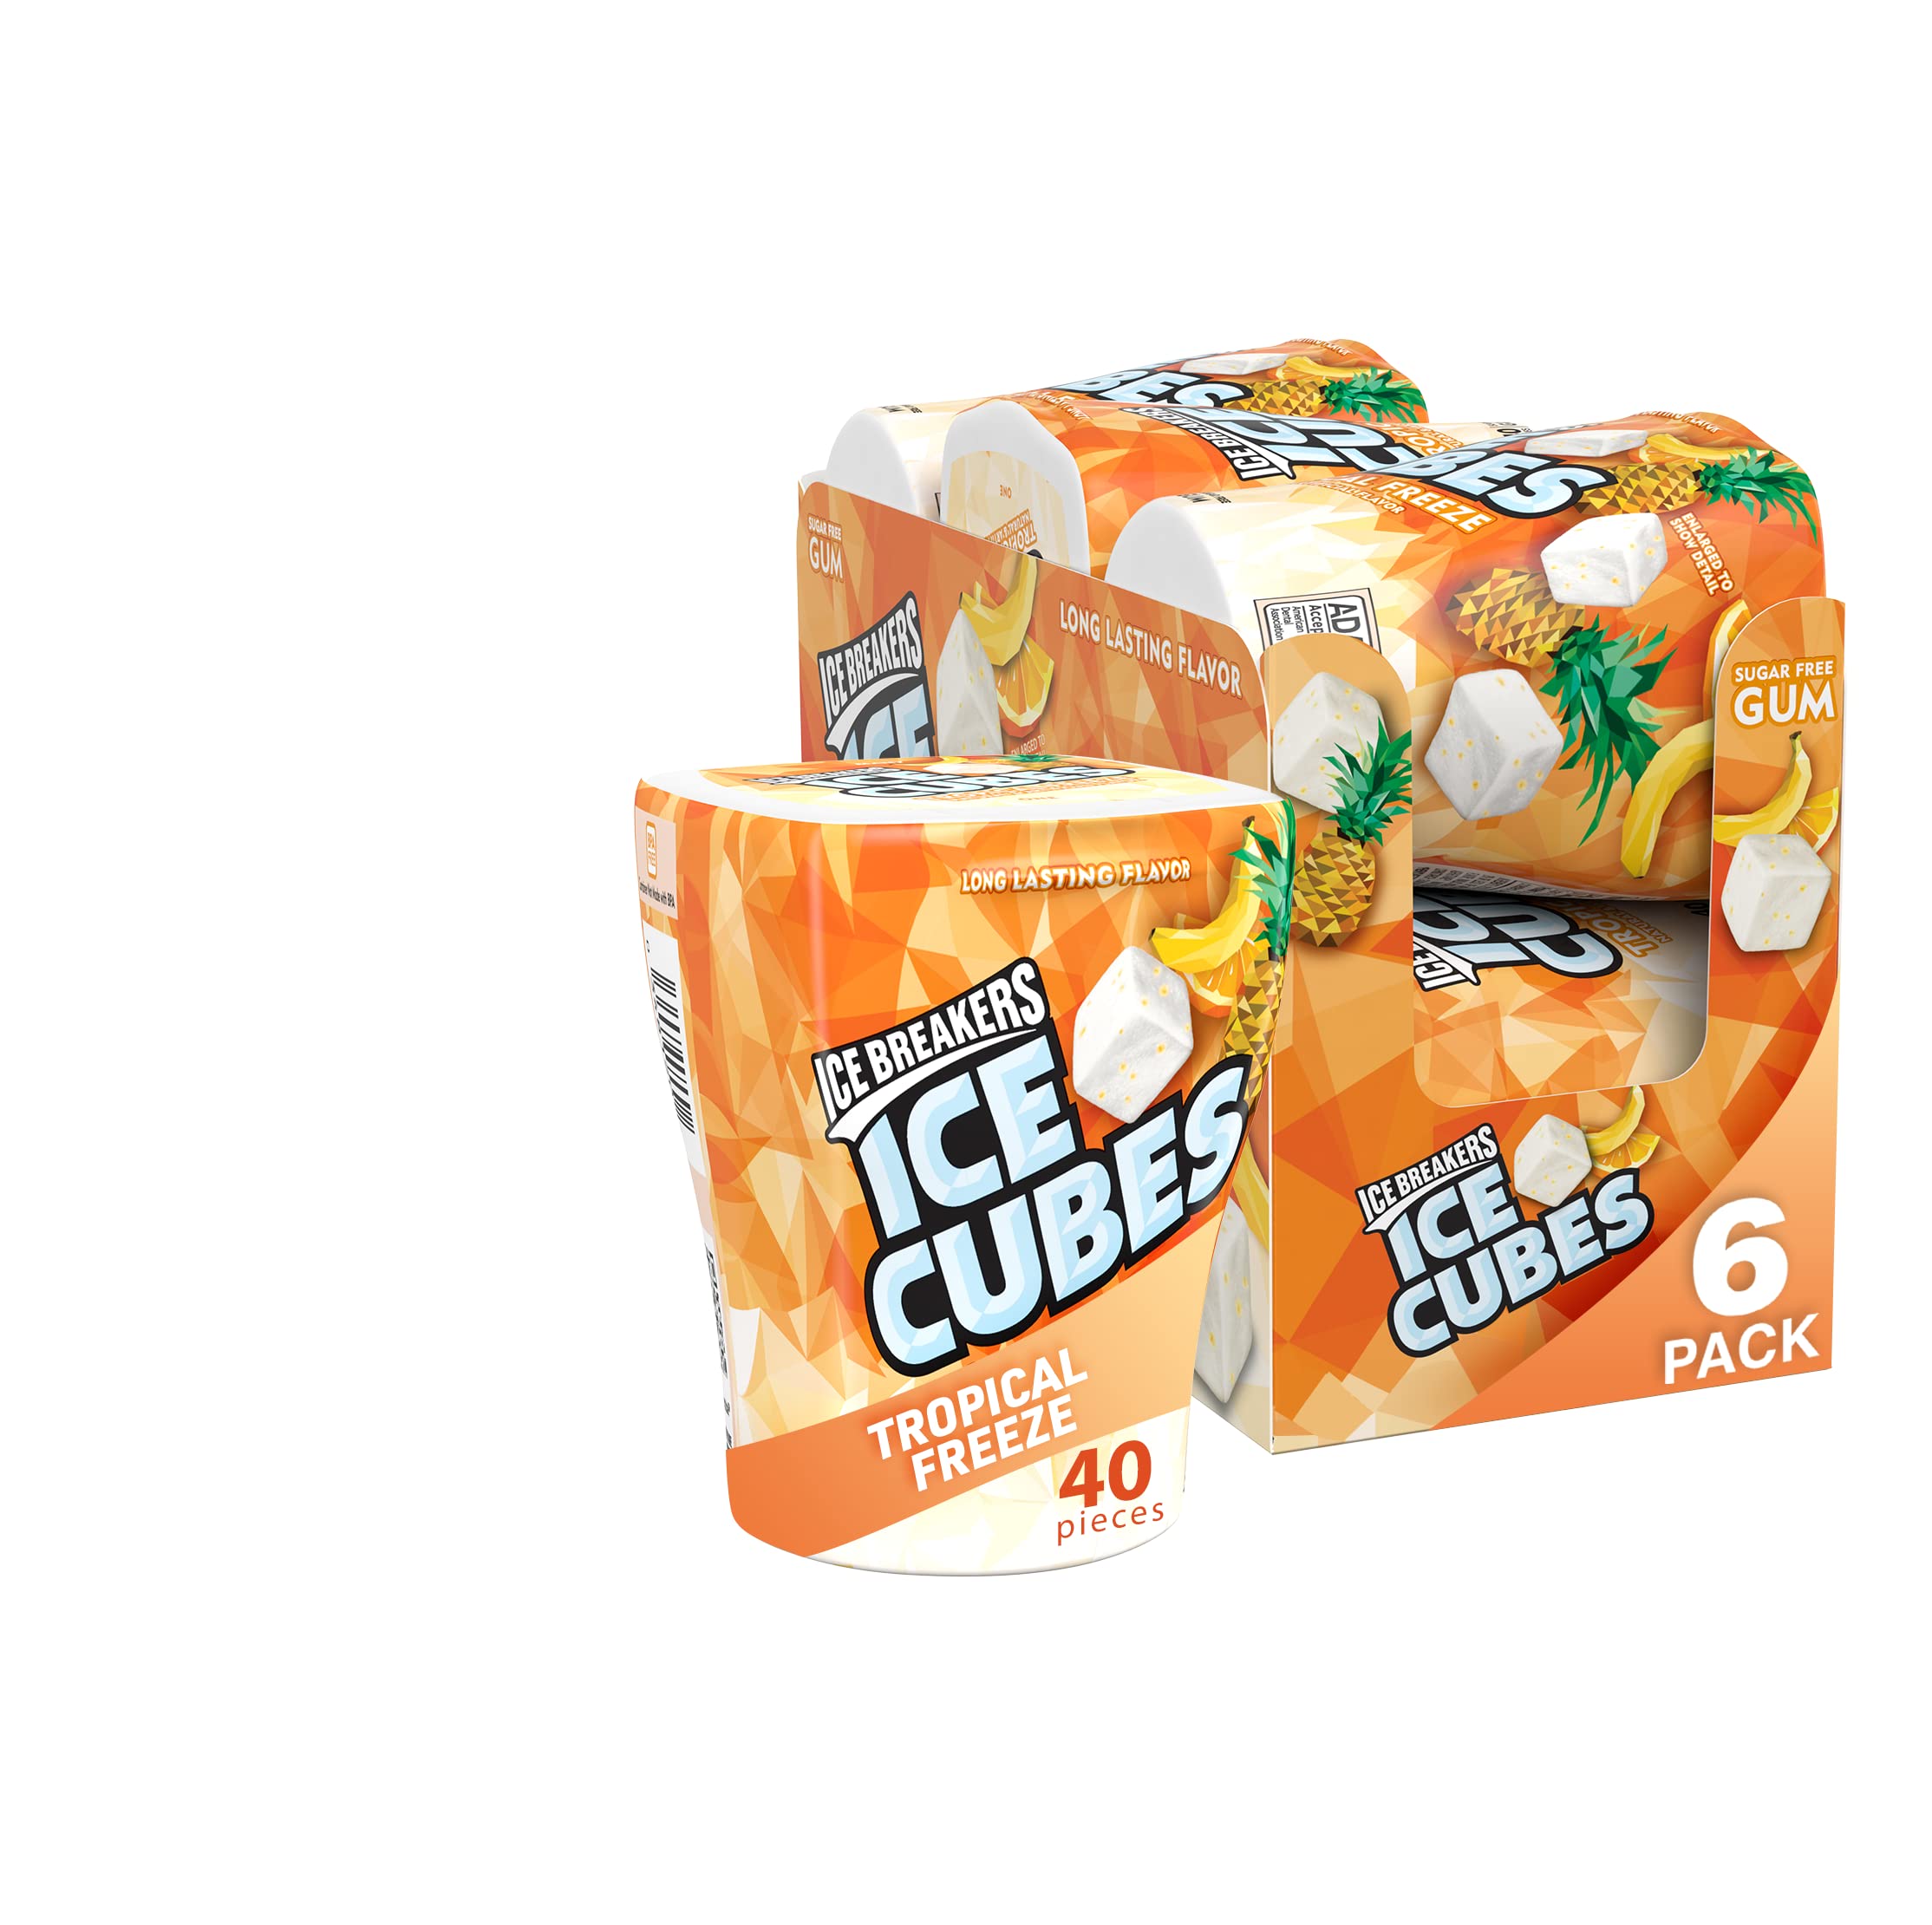 ICE BREAKERS ICE CUBES Tropical Freeze Flavored Sugar Free Chewing Gum, Made With Xylitol, 3.24 oz Bottles, 40 Count (Pack of 6) $16.89